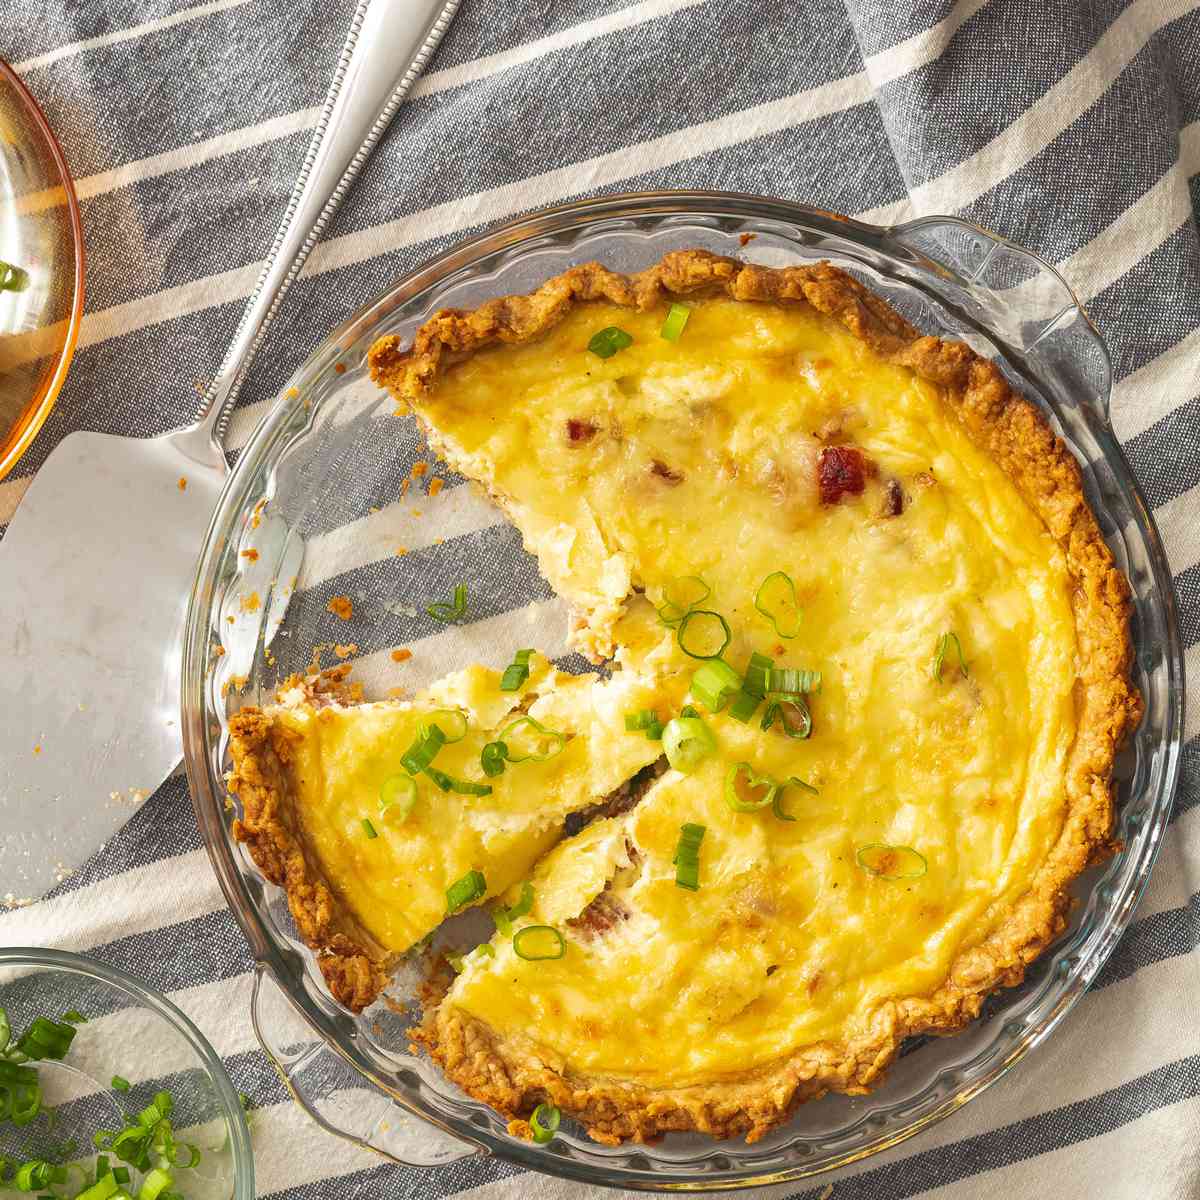 a pie dish of quiche lorraine with a slice missing